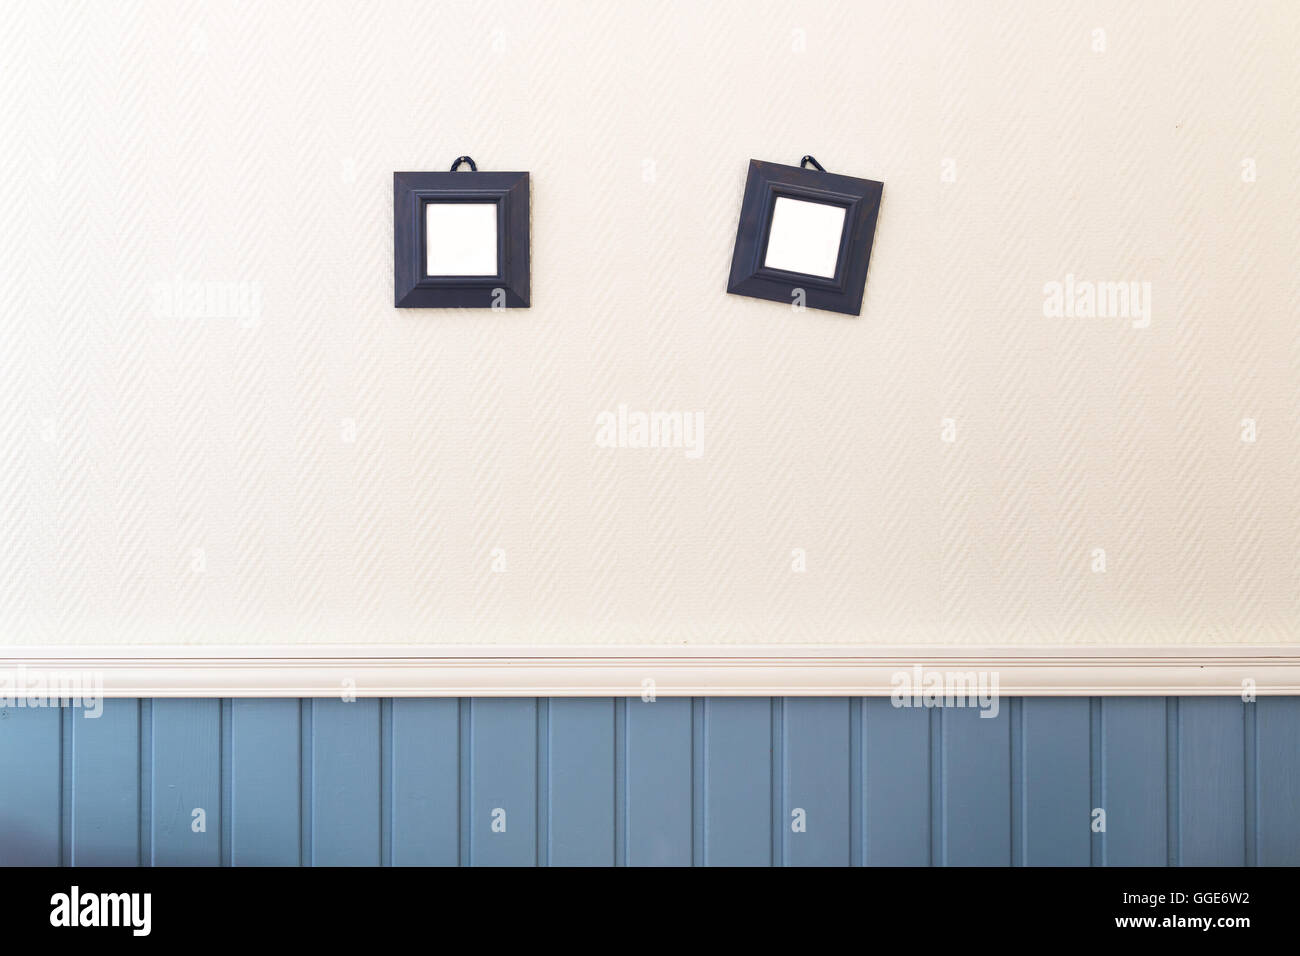 Two small square frames hanging on the white and blue wall. Stock Photo